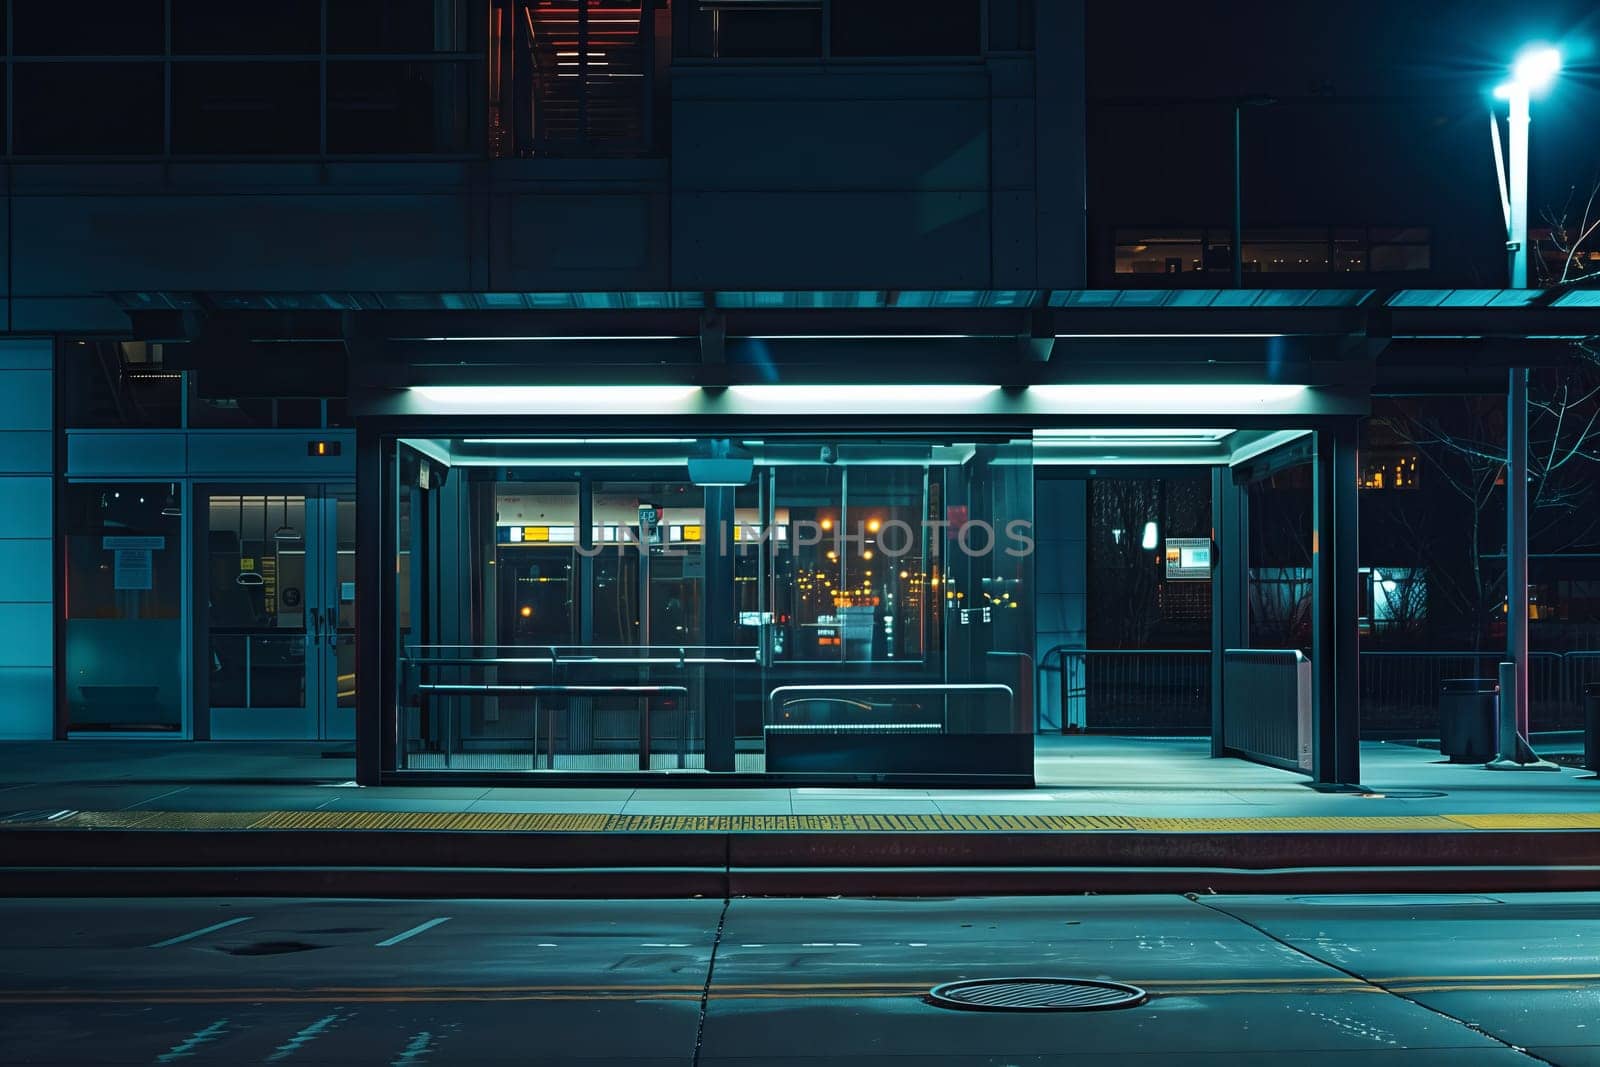 At midnight, an electric blue automotive lighting illuminates the bus stop in front of the buildings facade. The asphalt stairs lead to the city door